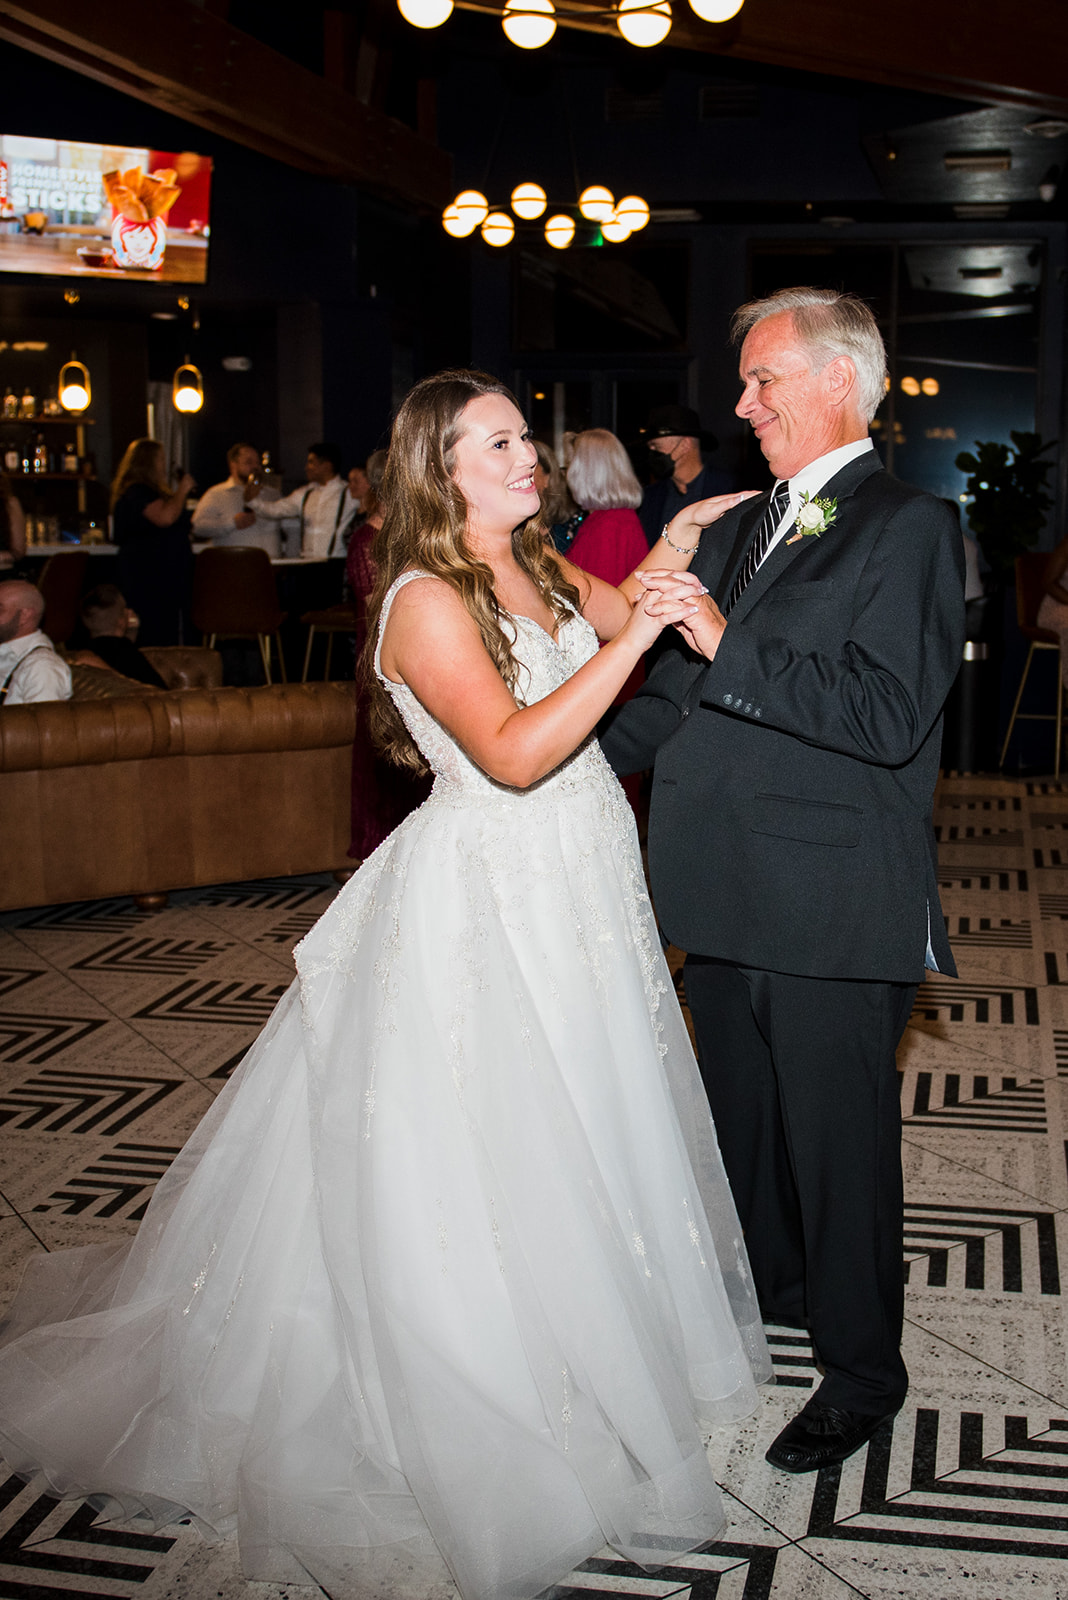 Bride shares first dance with her father.